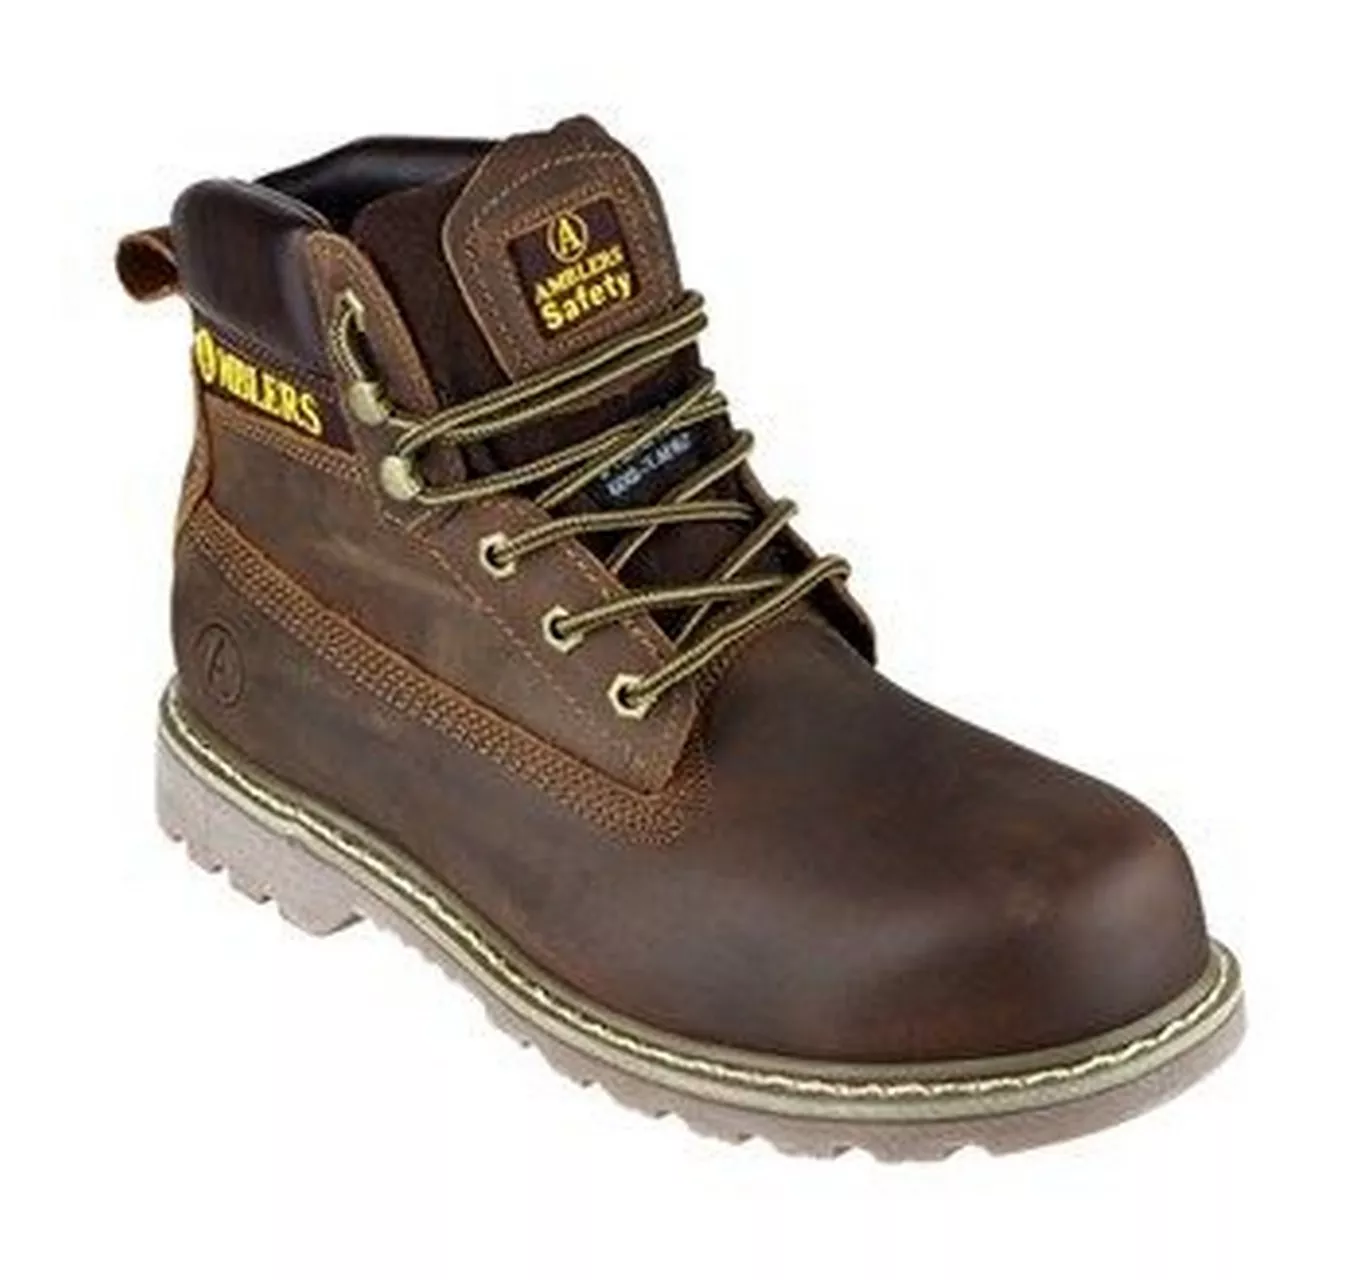 Safety Boot Amblers Fs164 Brown 8